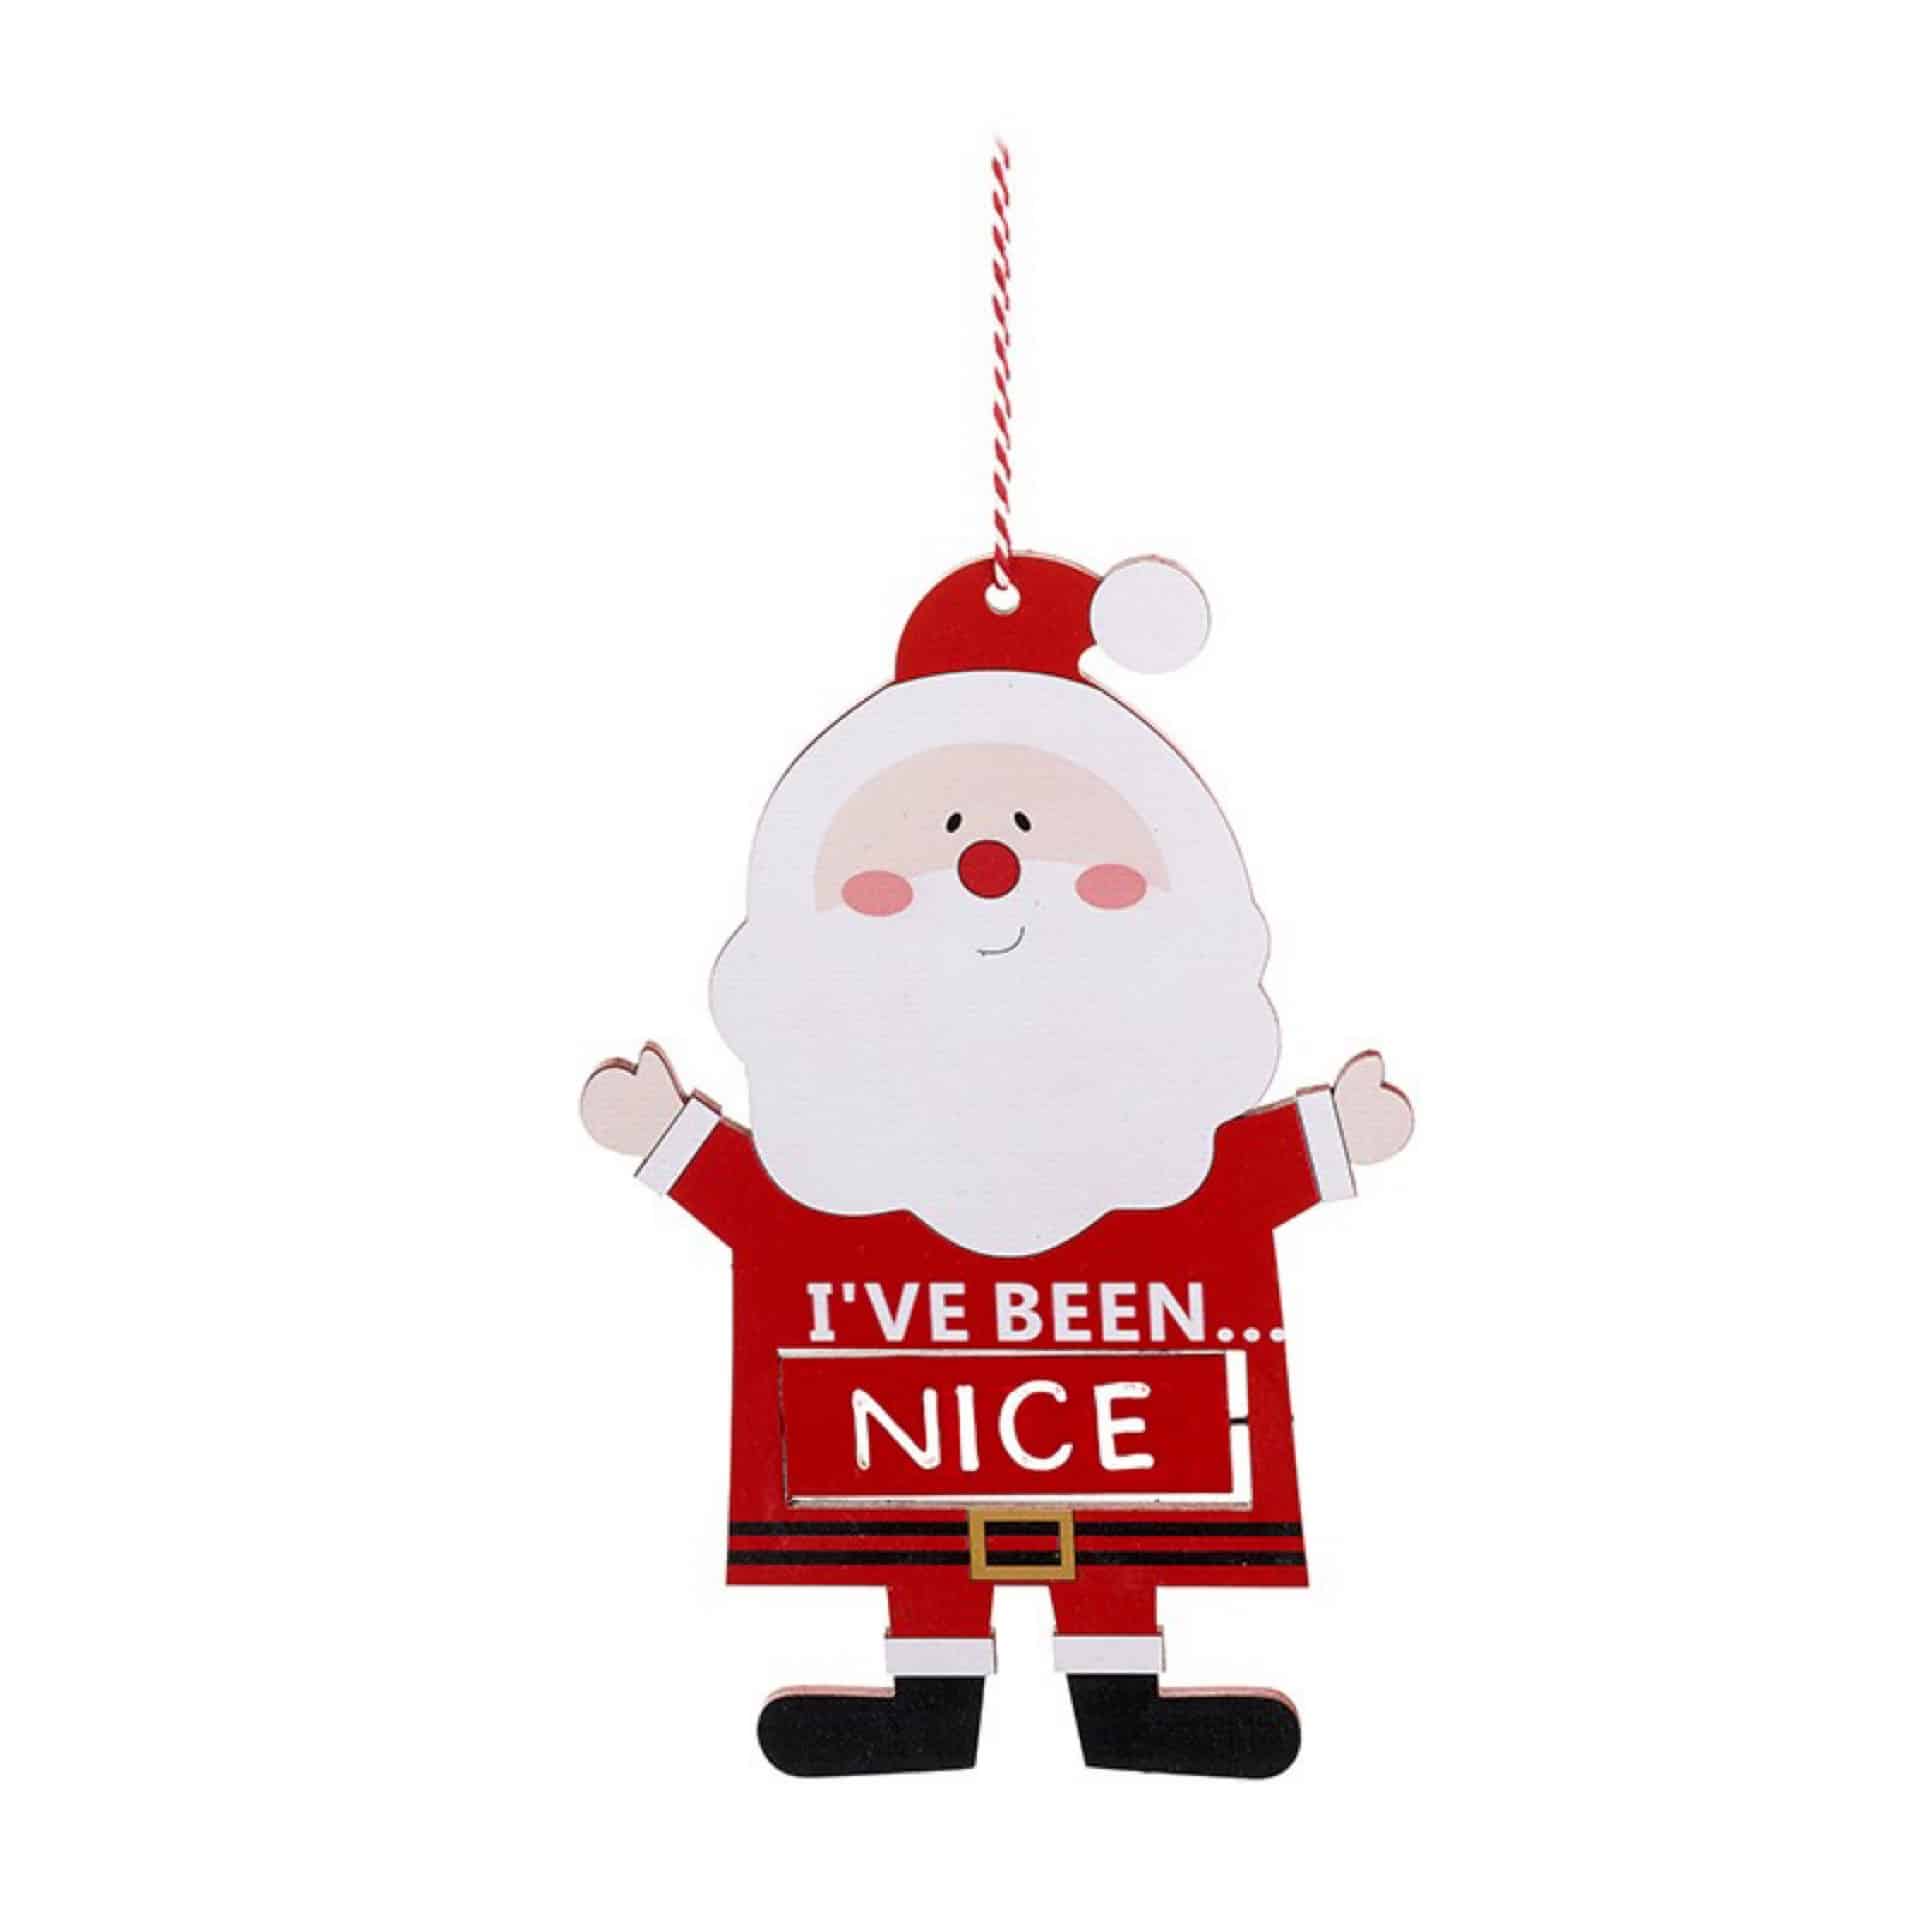 UKCS Homewares Limited t/as UK Christmas Store – While you are waiting ...